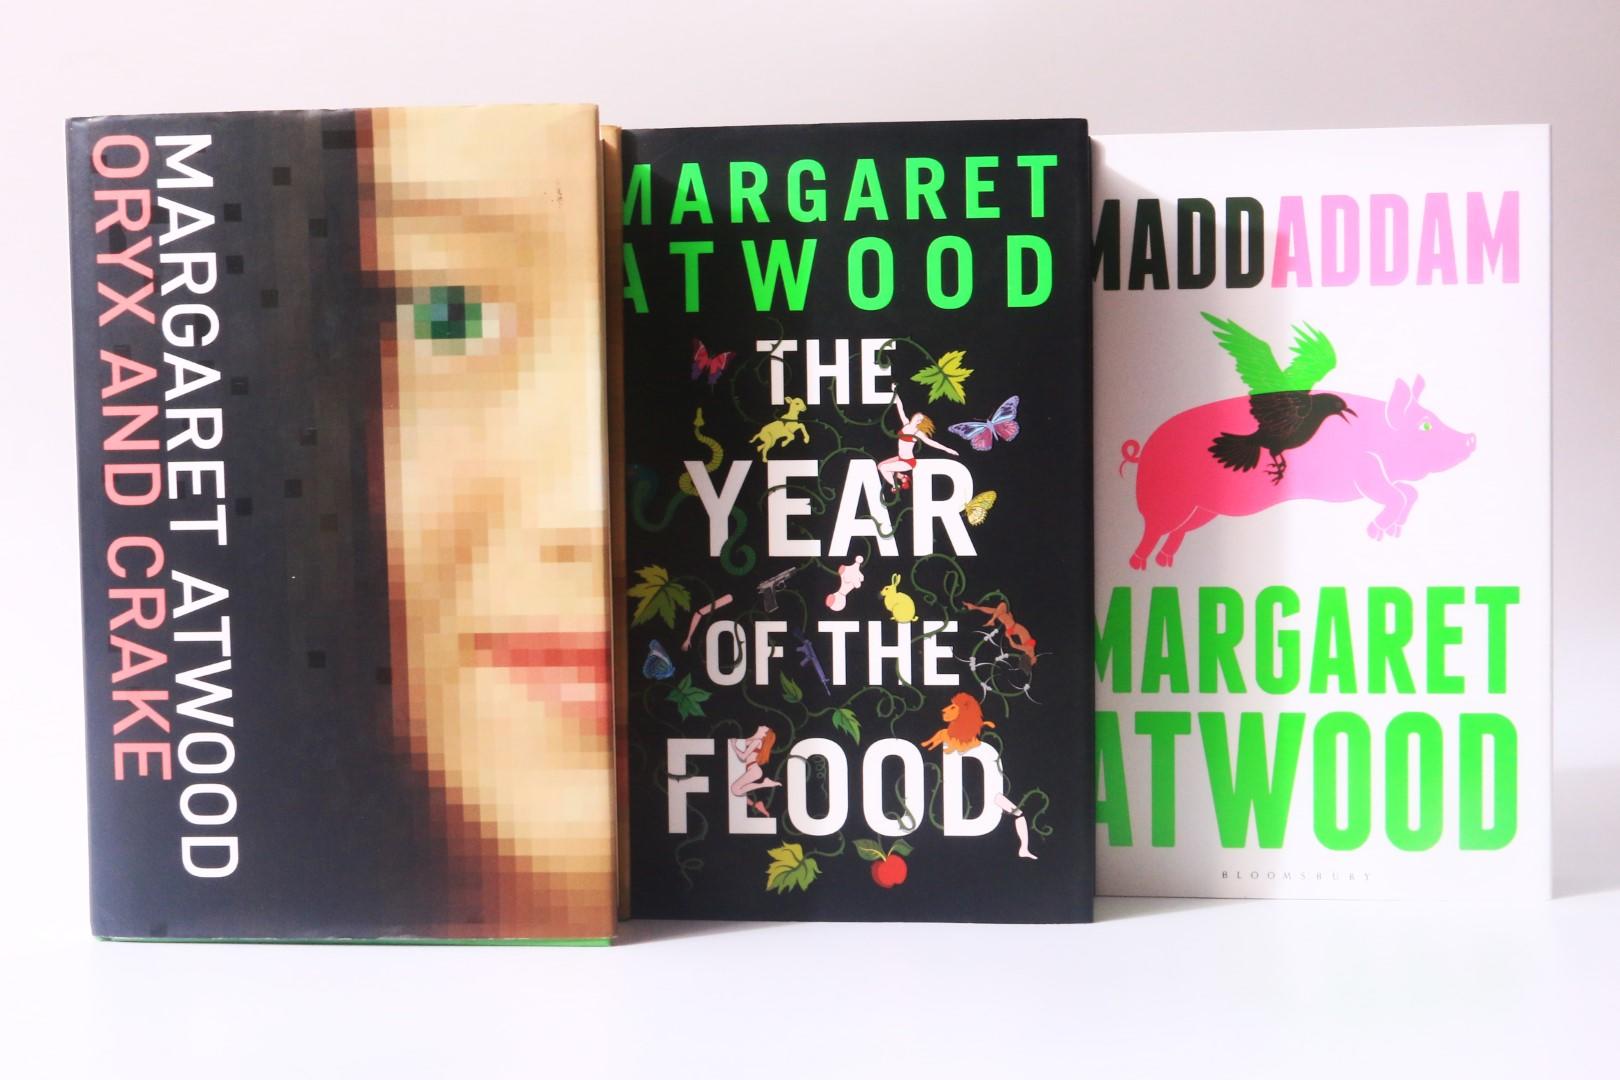 Margaret Atwood - The MaddAddam Trilogy [comprising] Oryx and Crake, The Year of the Flood and MaddAddam - Bloomsbury, 2003-2013, Signed First Edition.